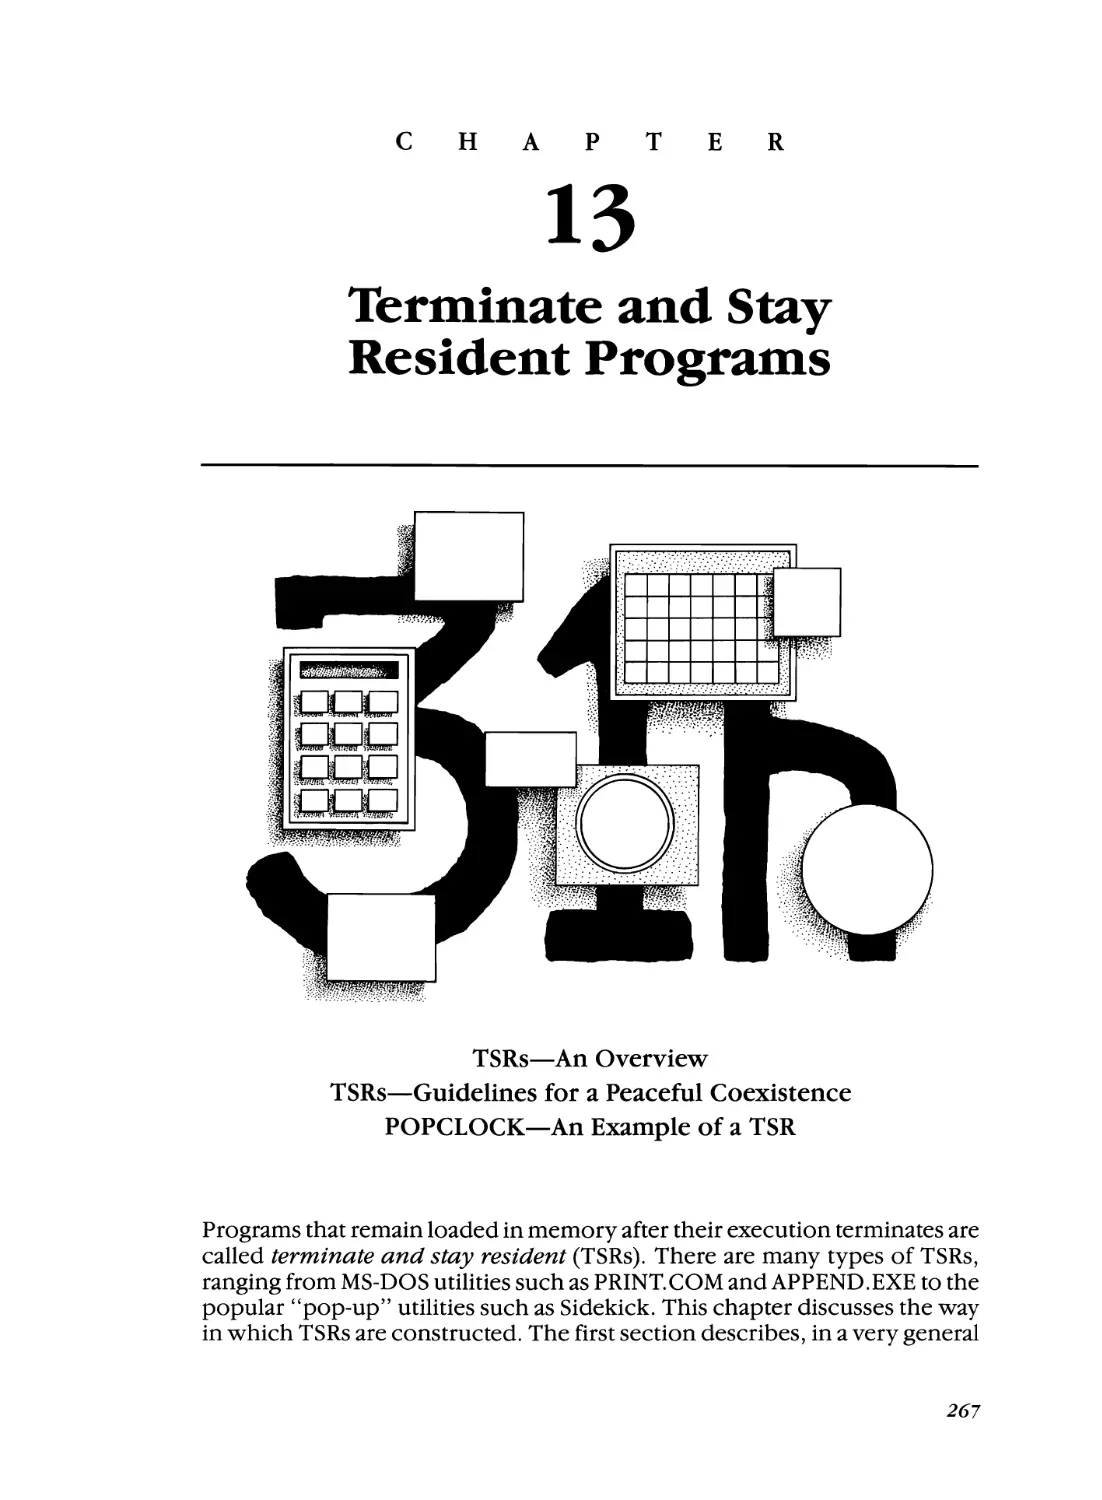 Chapter 13 - Terminate and Stay Resident Programs